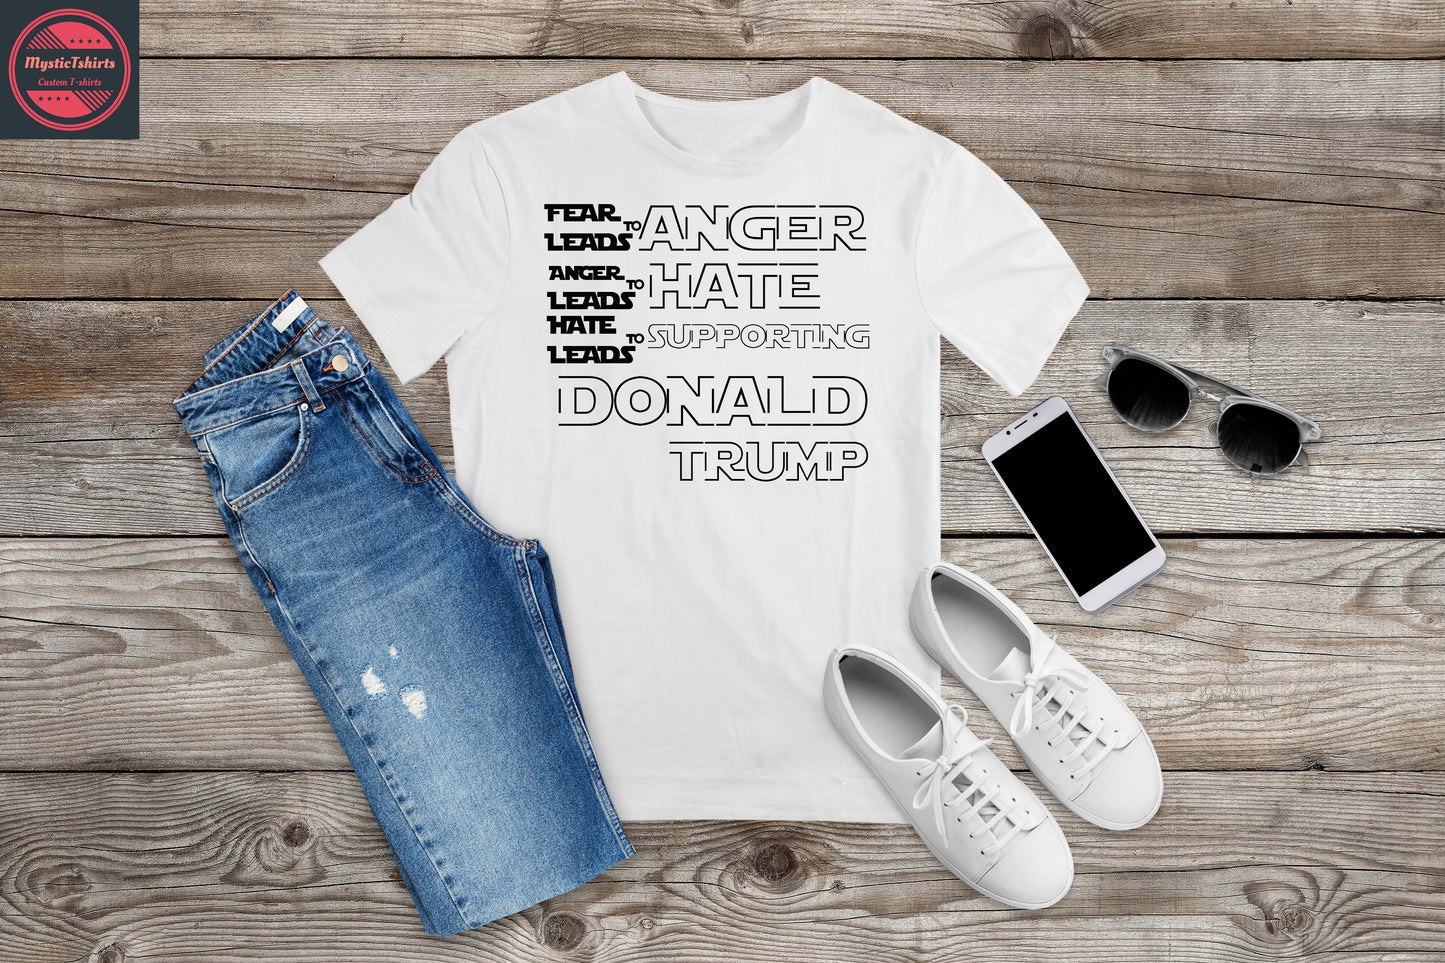 144. FEAR, ANGER, HATE LEADS TO, Custom Made Shirt, Personalized T-Shirt, Custom Text, Make Your Own Shirt, Custom Tee